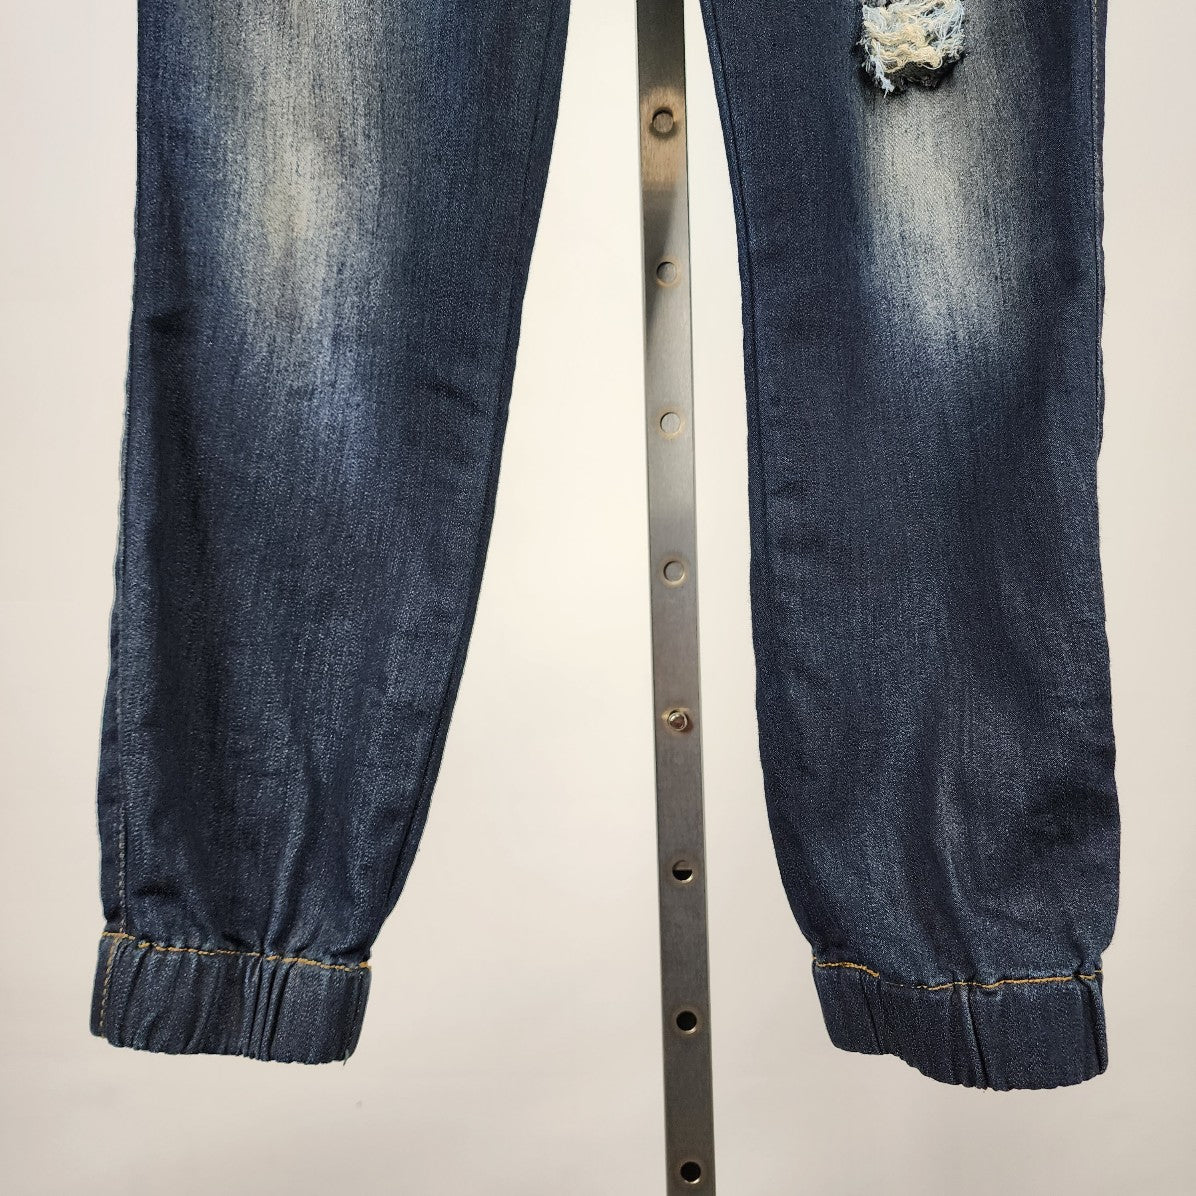 Guess Dark Wash Blue Distressed Jogger Jeans Size 26